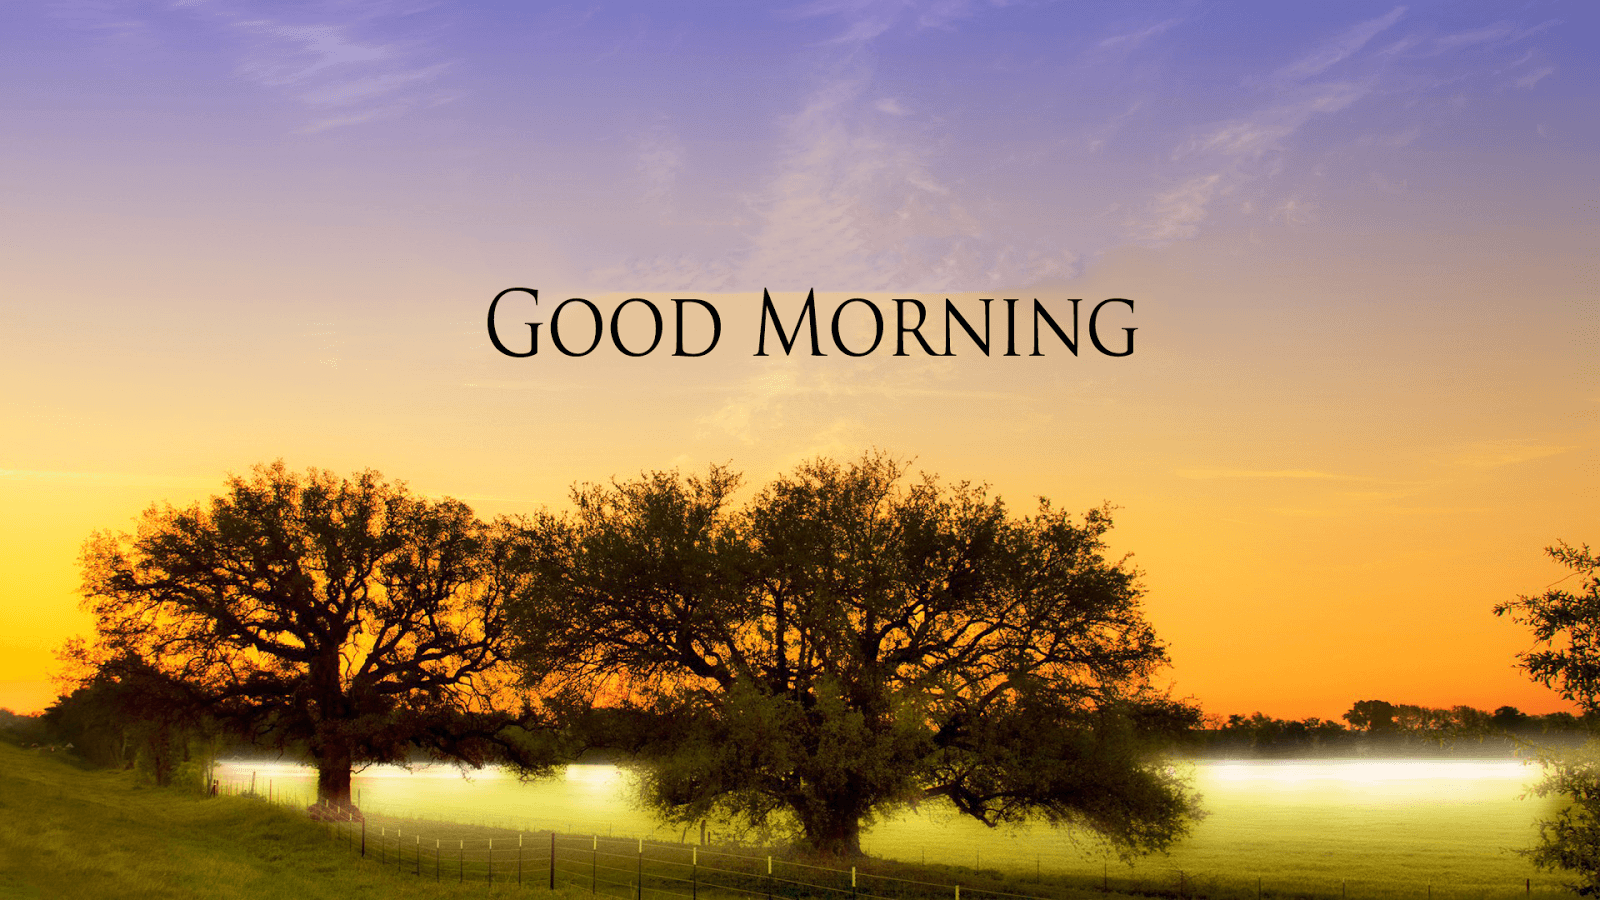 Good Morning Wallpapers HD Download Free 1080p